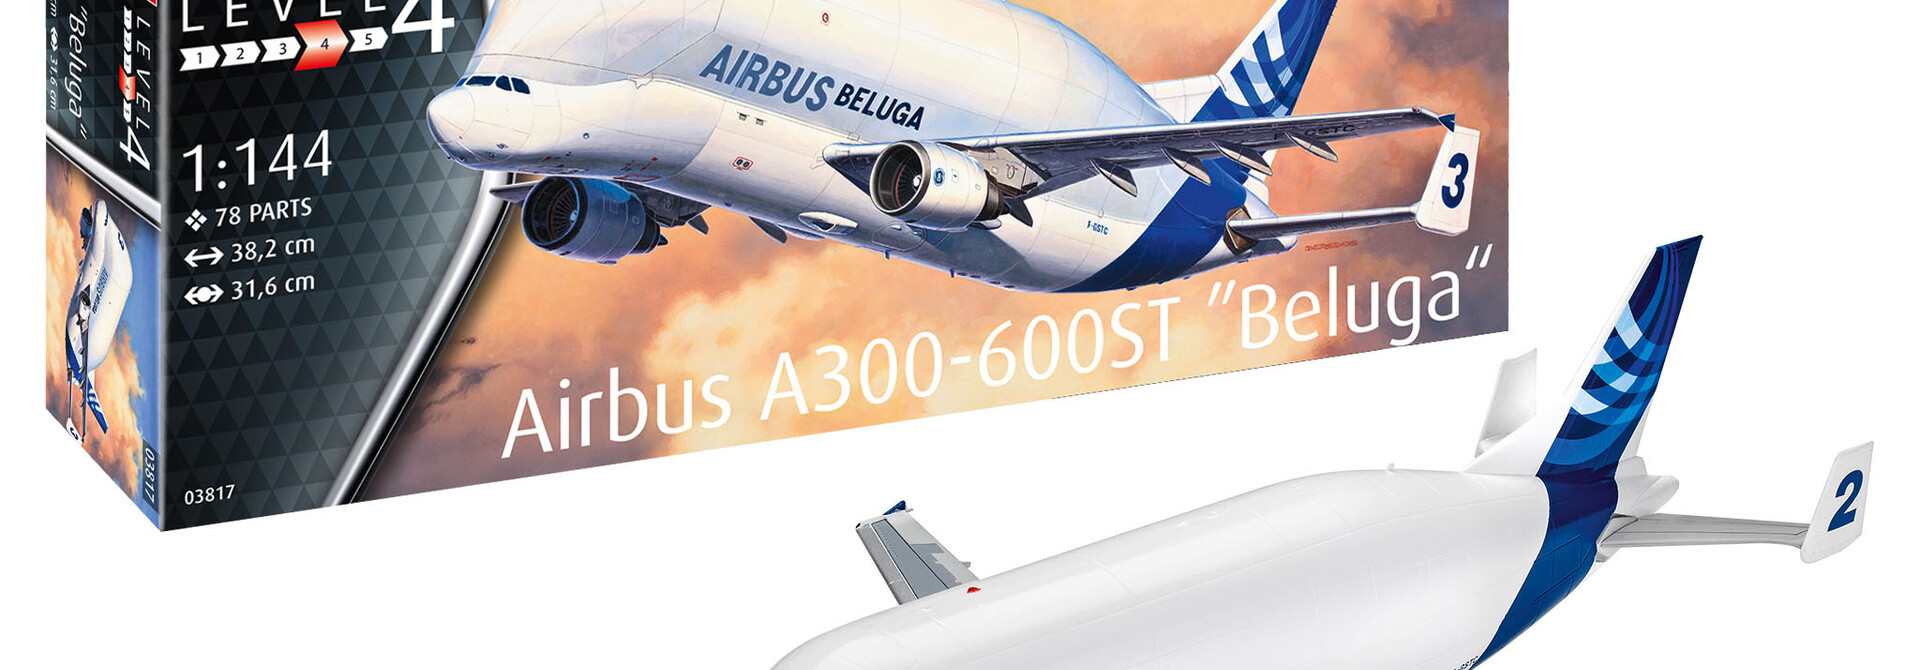 03817 Airbus A300-600ST 1:144